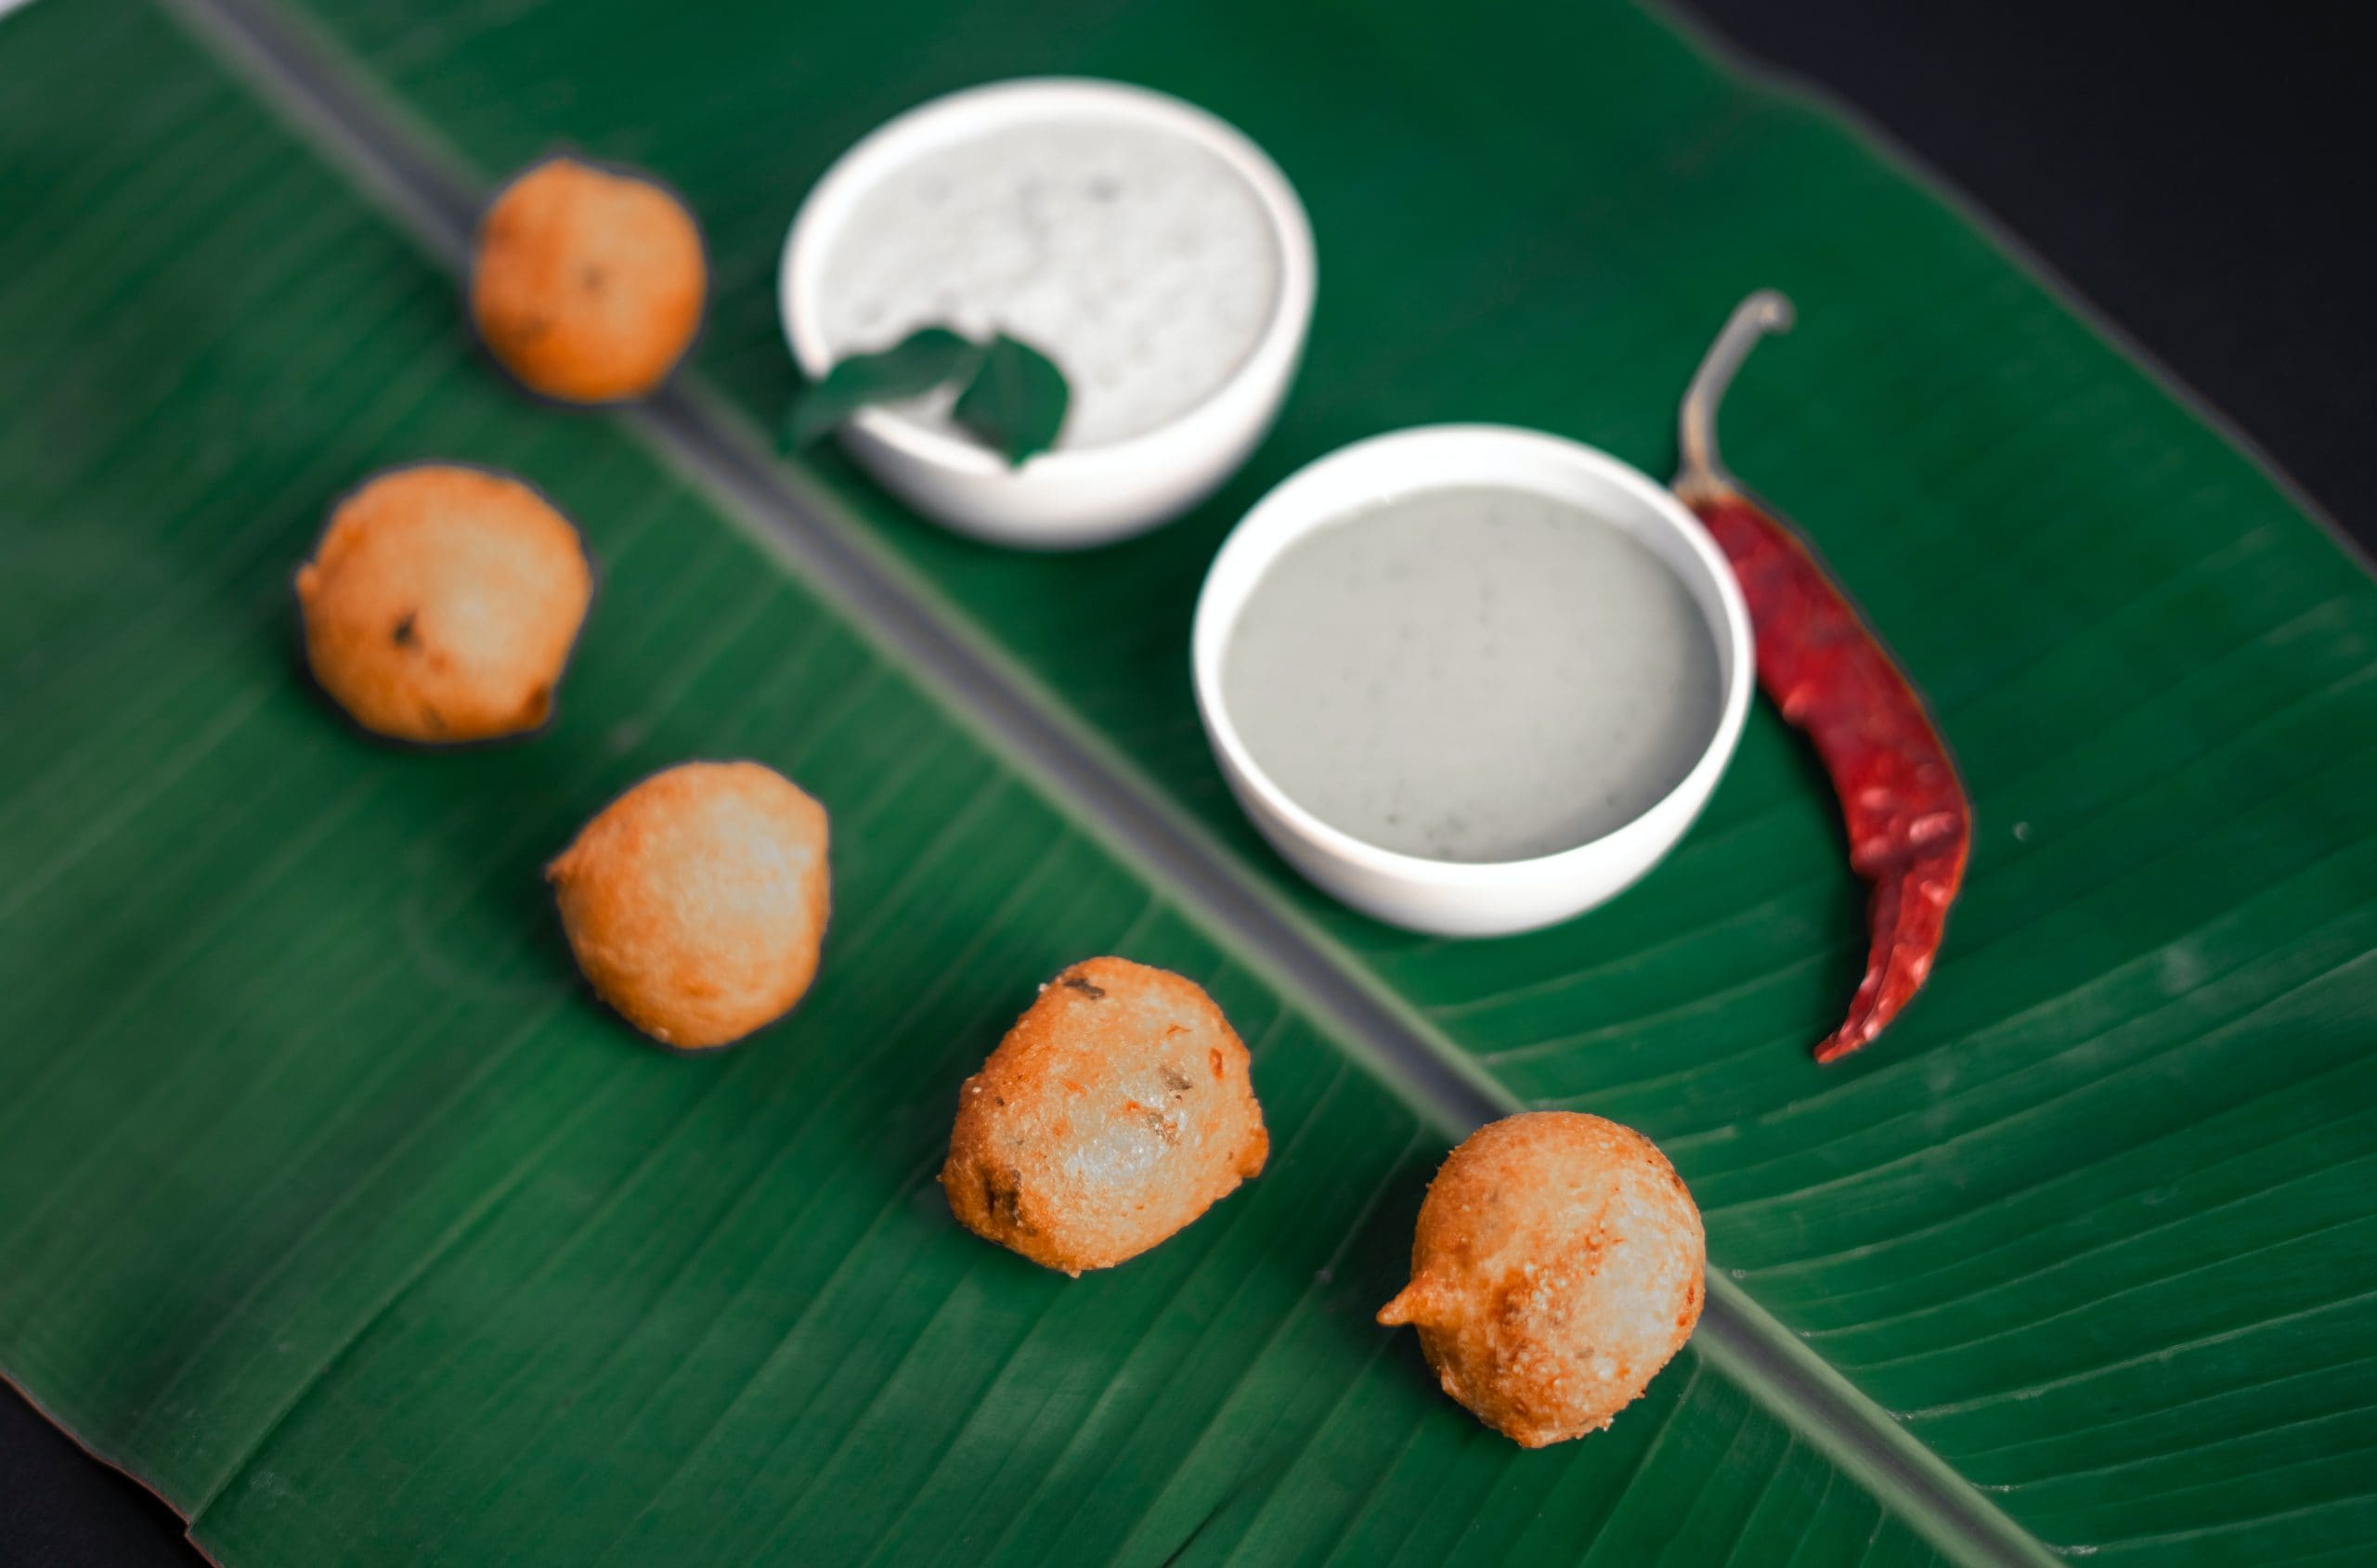 Which of these cuisines is traditionally served on a banana leaf?